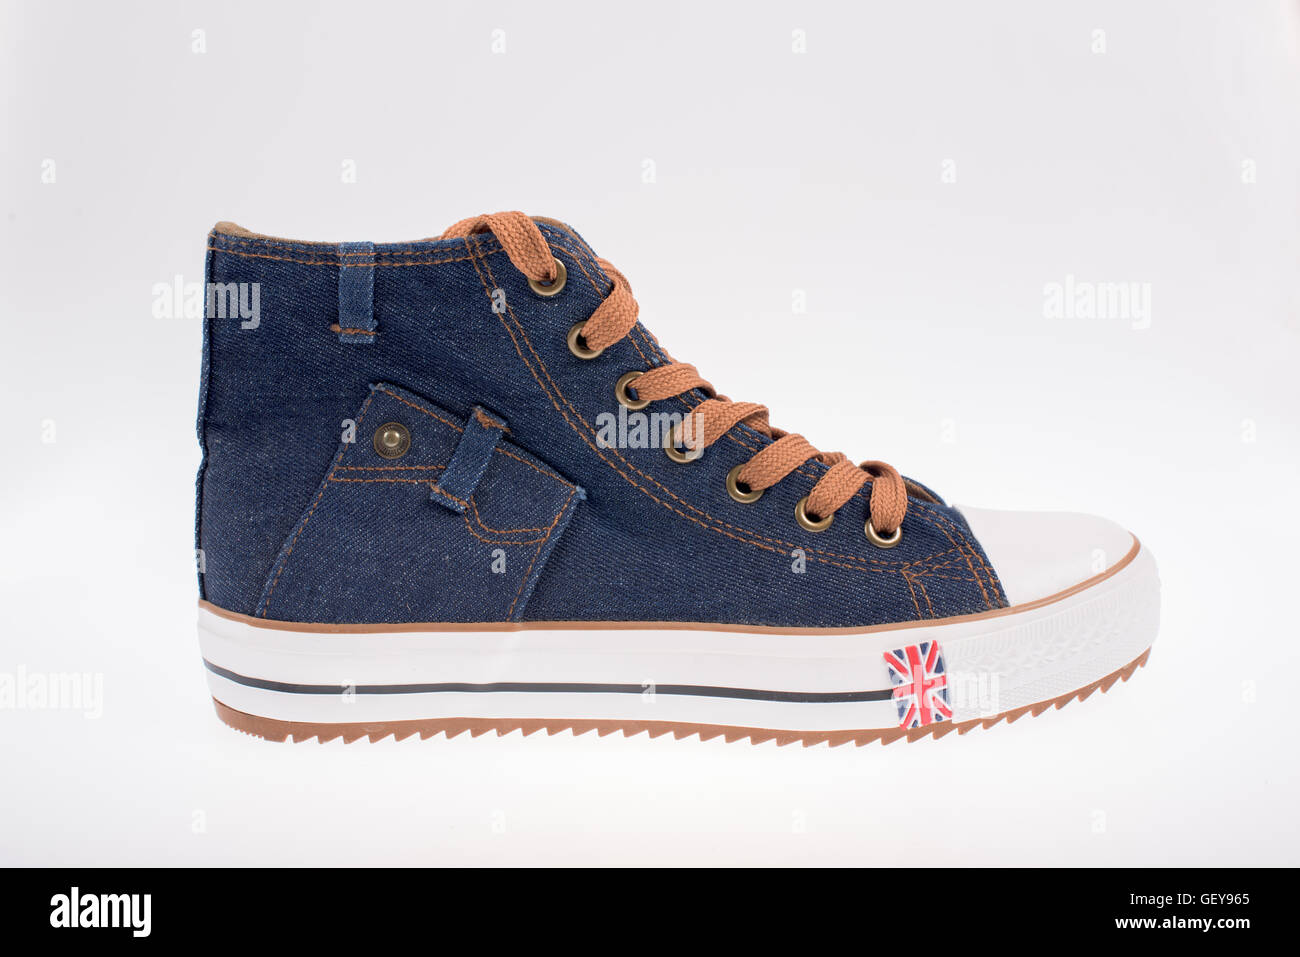 Right sneaker made of denim on a white background Stock Photo